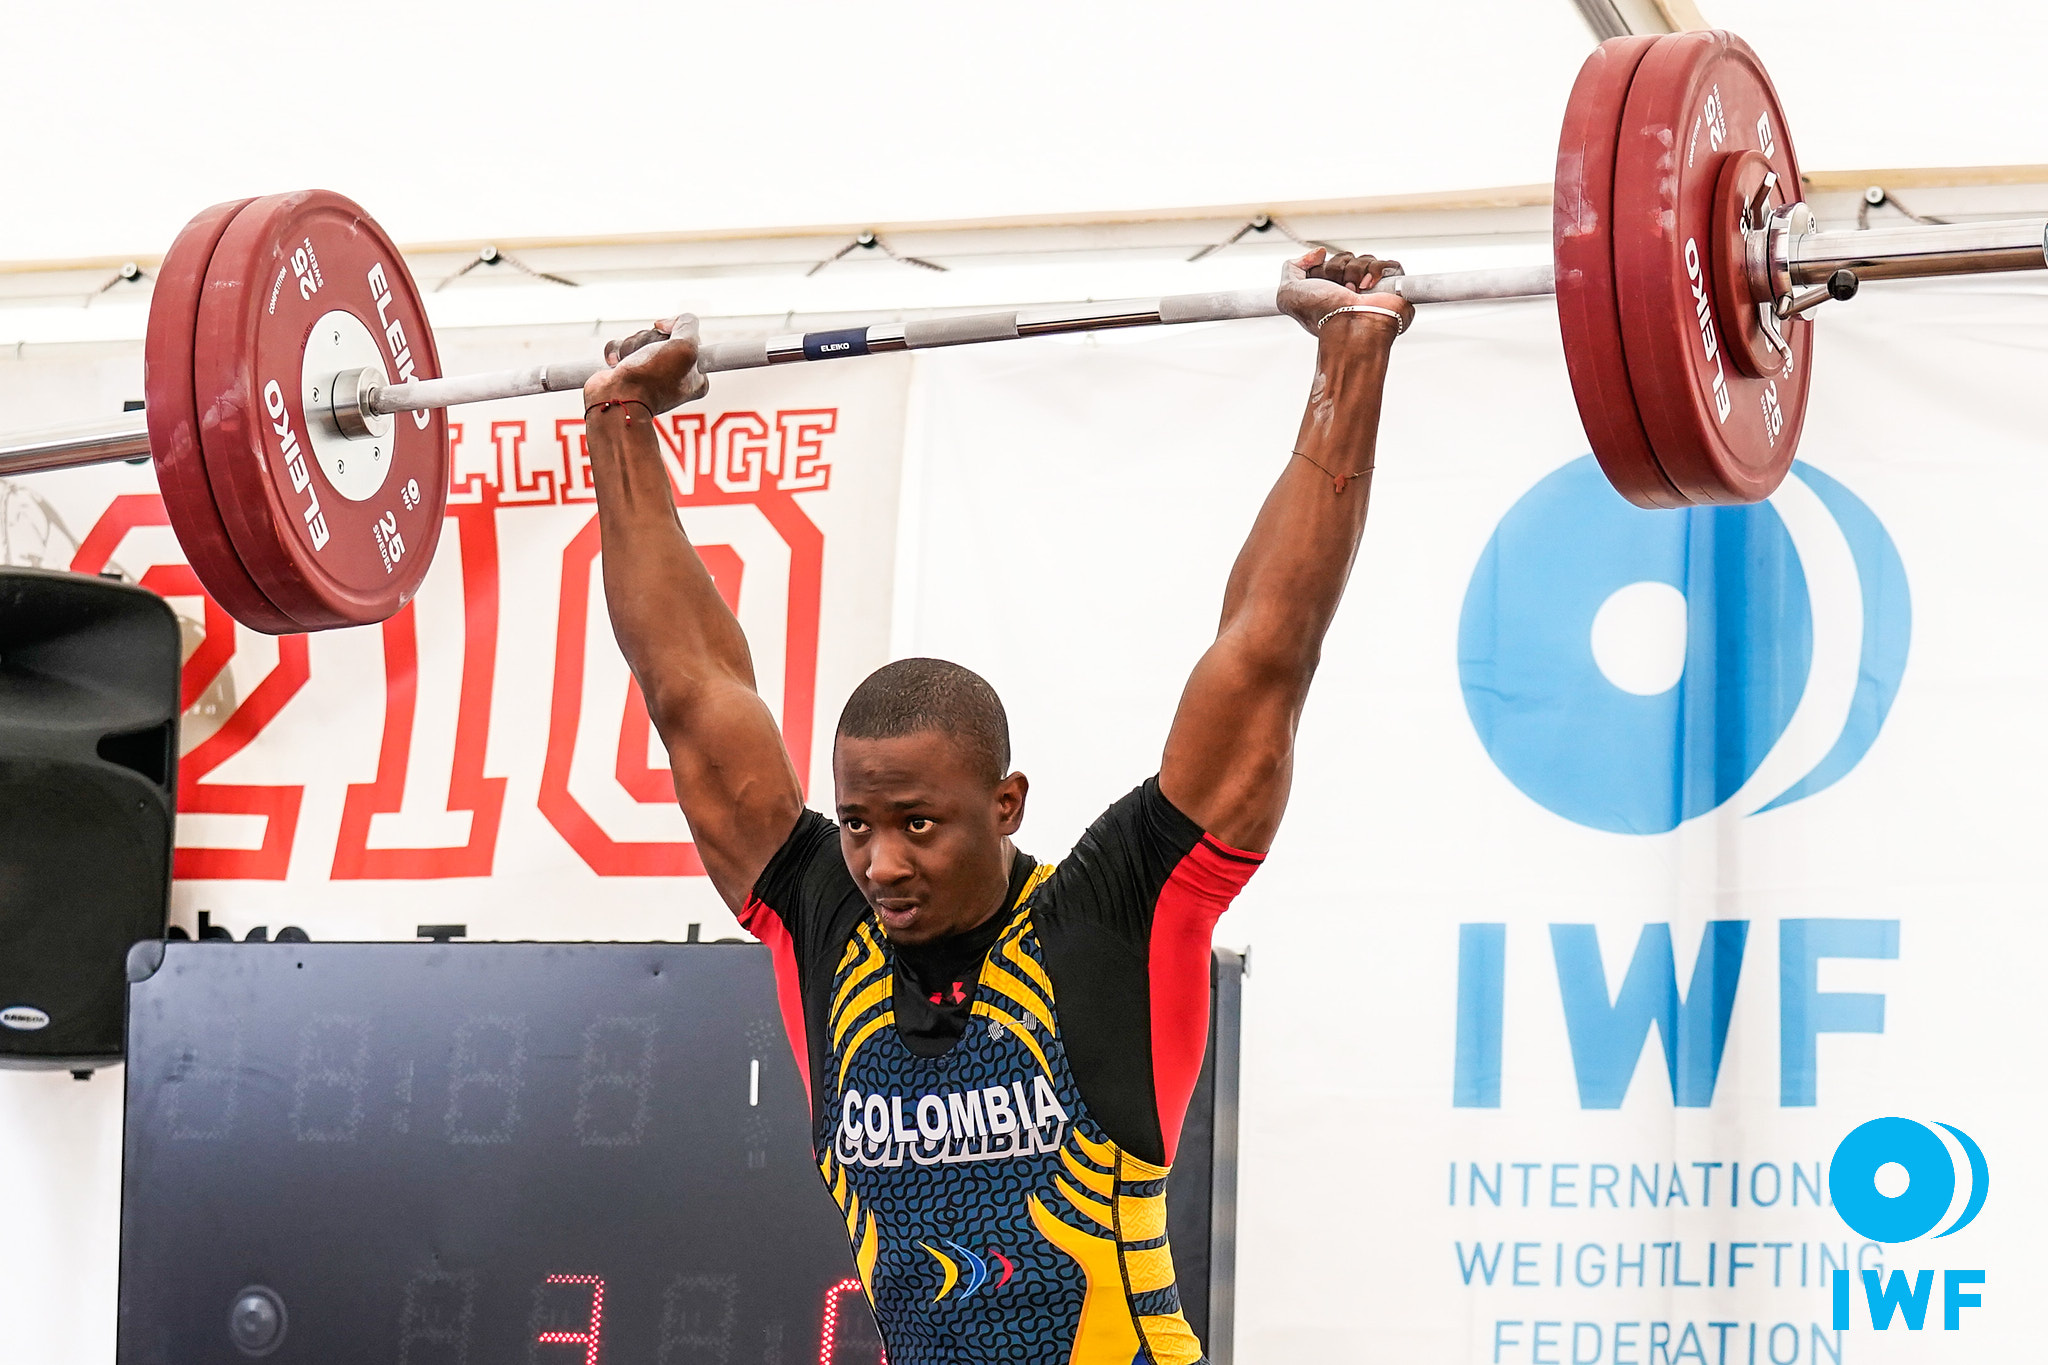 IWF appoints Colombia as the host nation for the 2022 IWF Senior World Championships